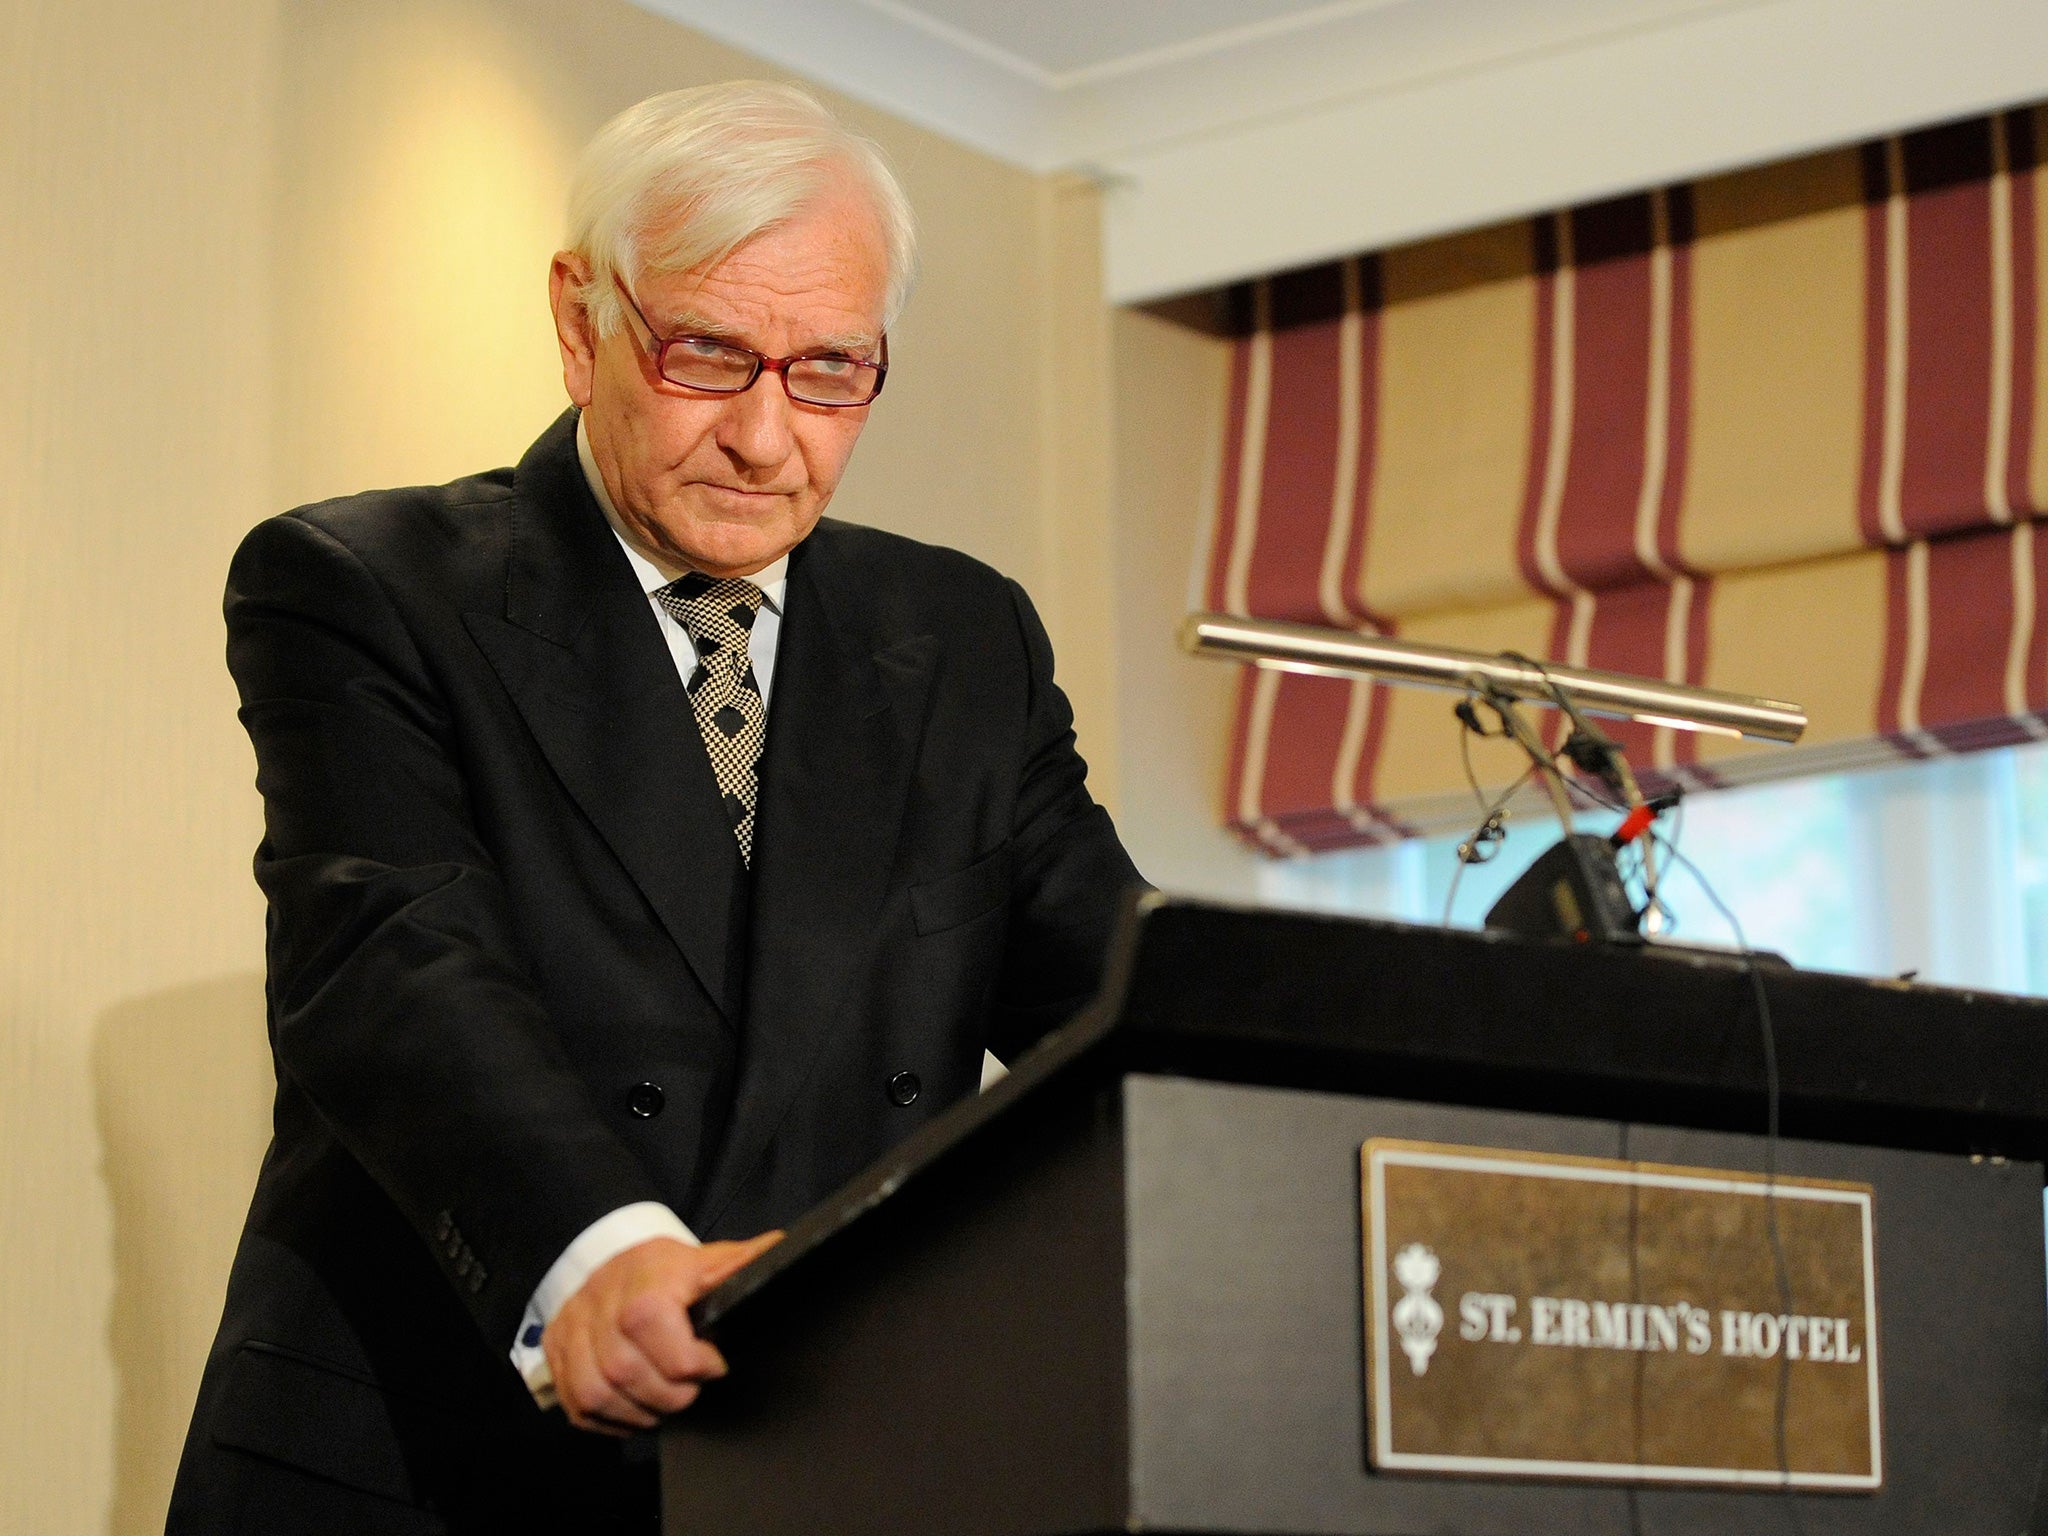 Former Tory MP Harvey Proctor speaks during a press conference at St Ermin's Hotel, London, where he insisted he is "completely innocent"